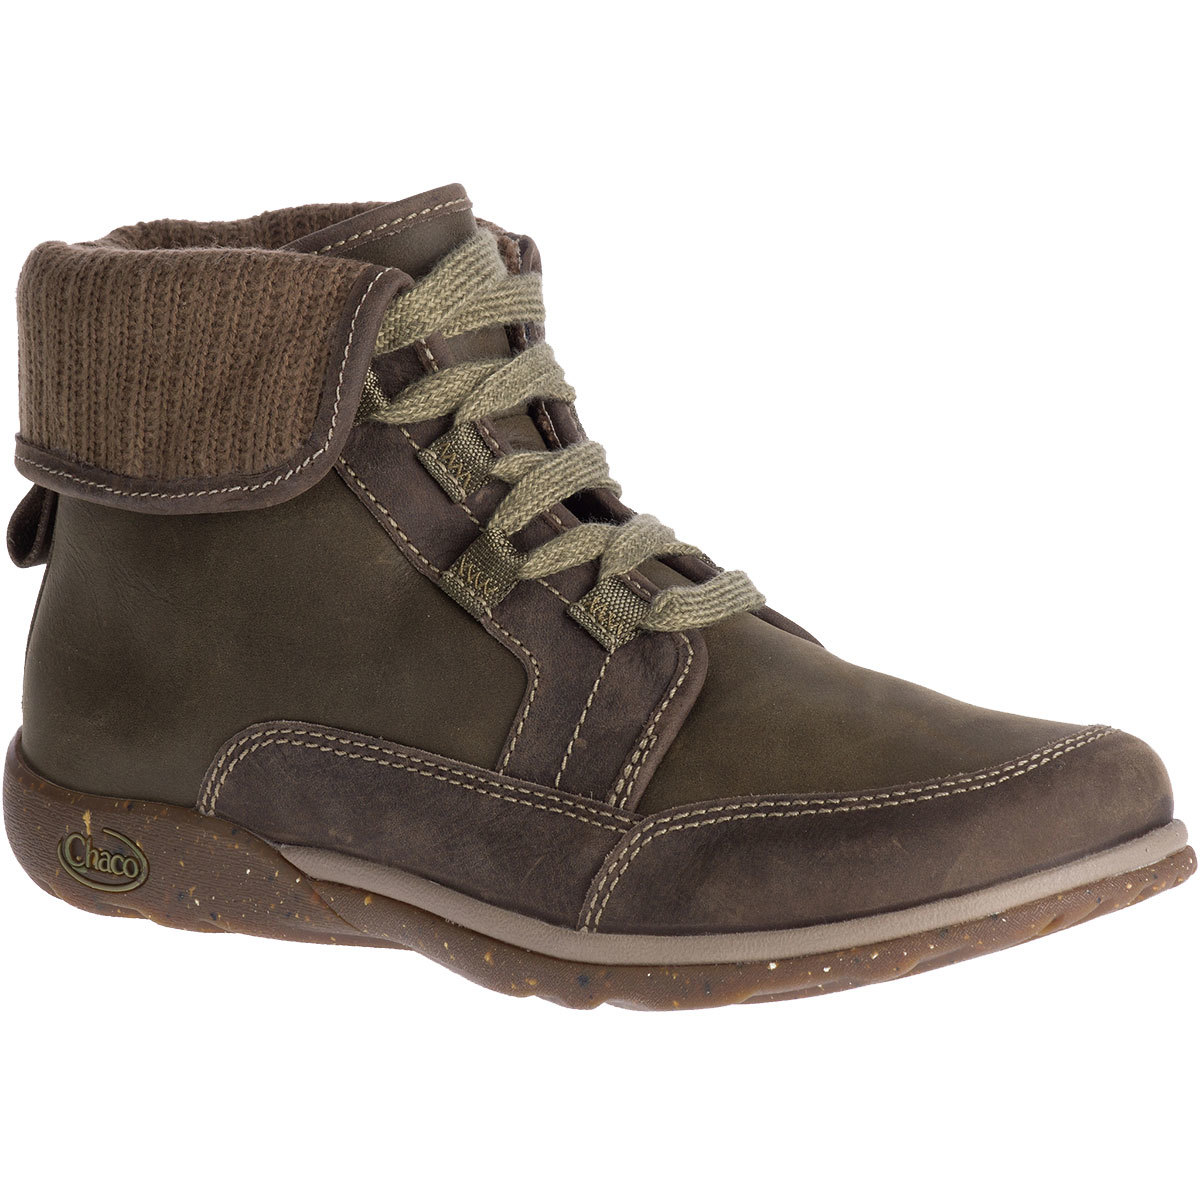 Chaco Women's Barbary Waterproof Fold-Down Storm Boots - Green, 8.5